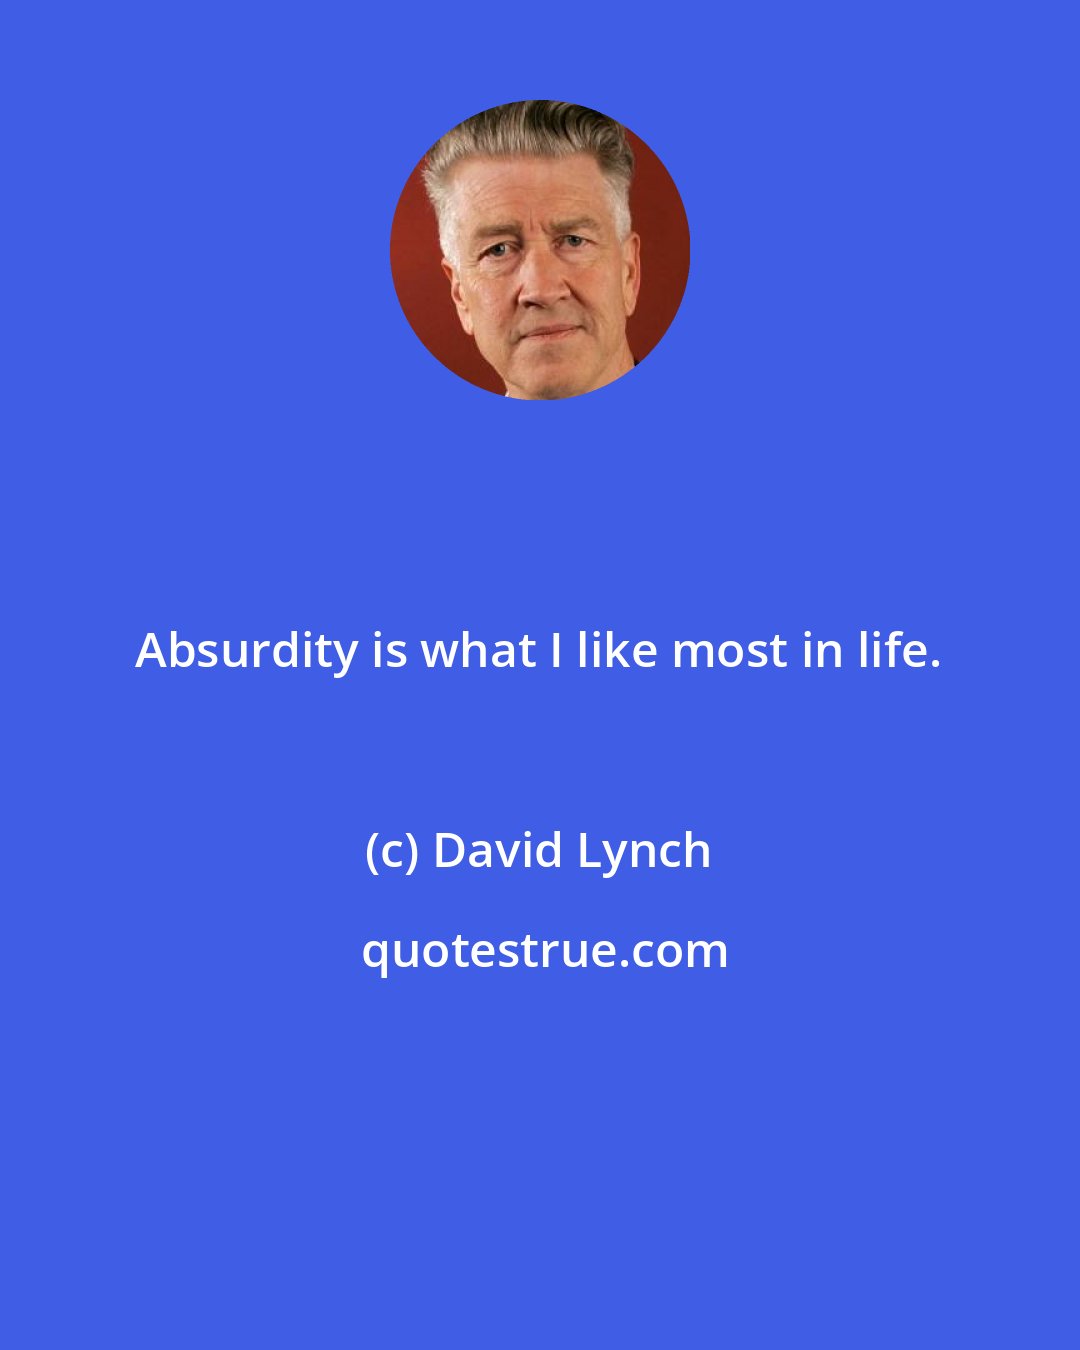 David Lynch: Absurdity is what I like most in life.